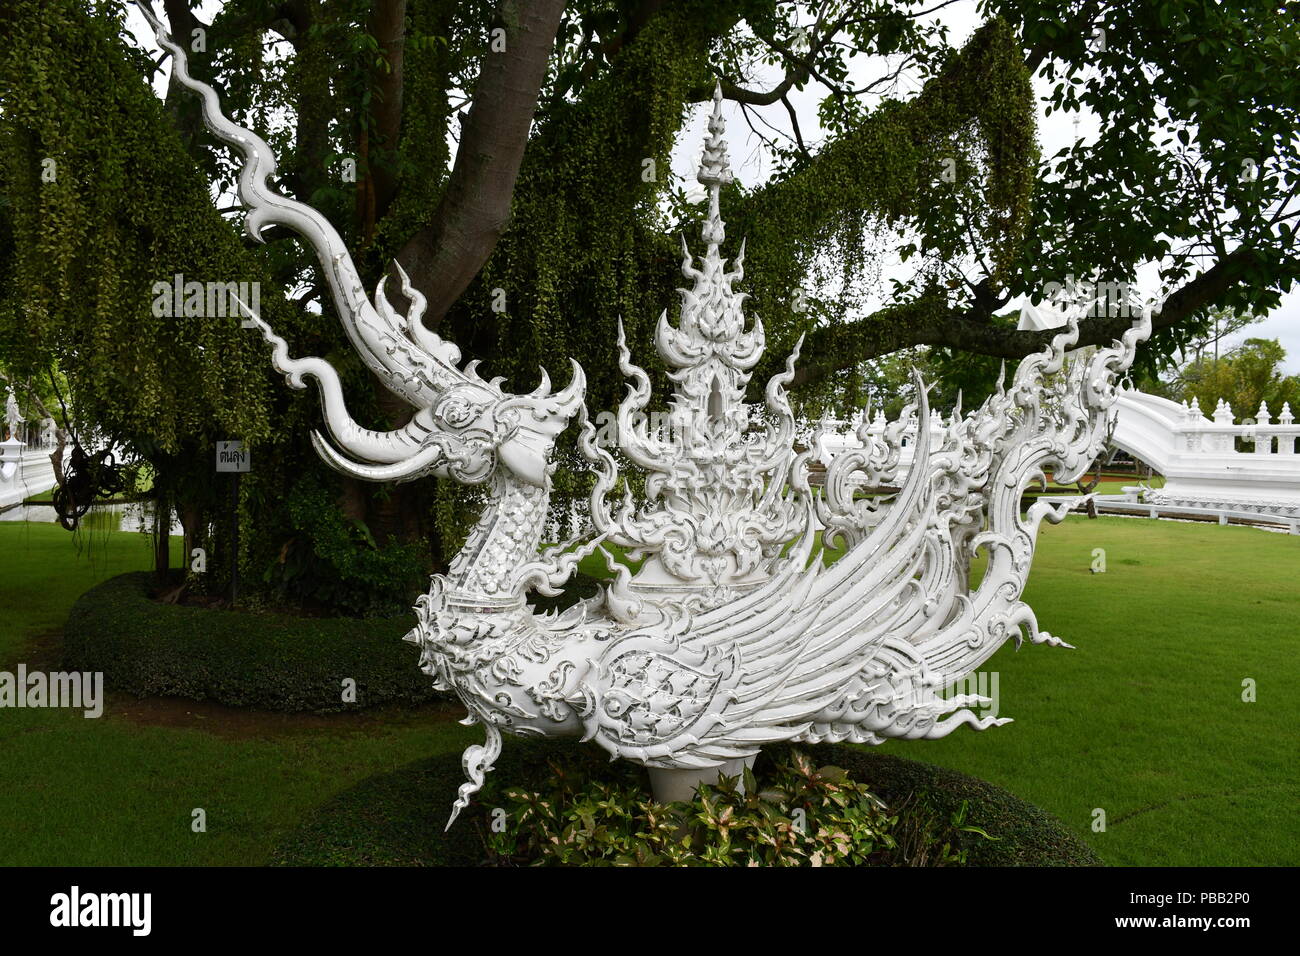 Image collection from The White Temple in Chiang Rai, Thailand that demonstrate the modern art approach of it's creator, Chalermchai Kositpipat. Stock Photo